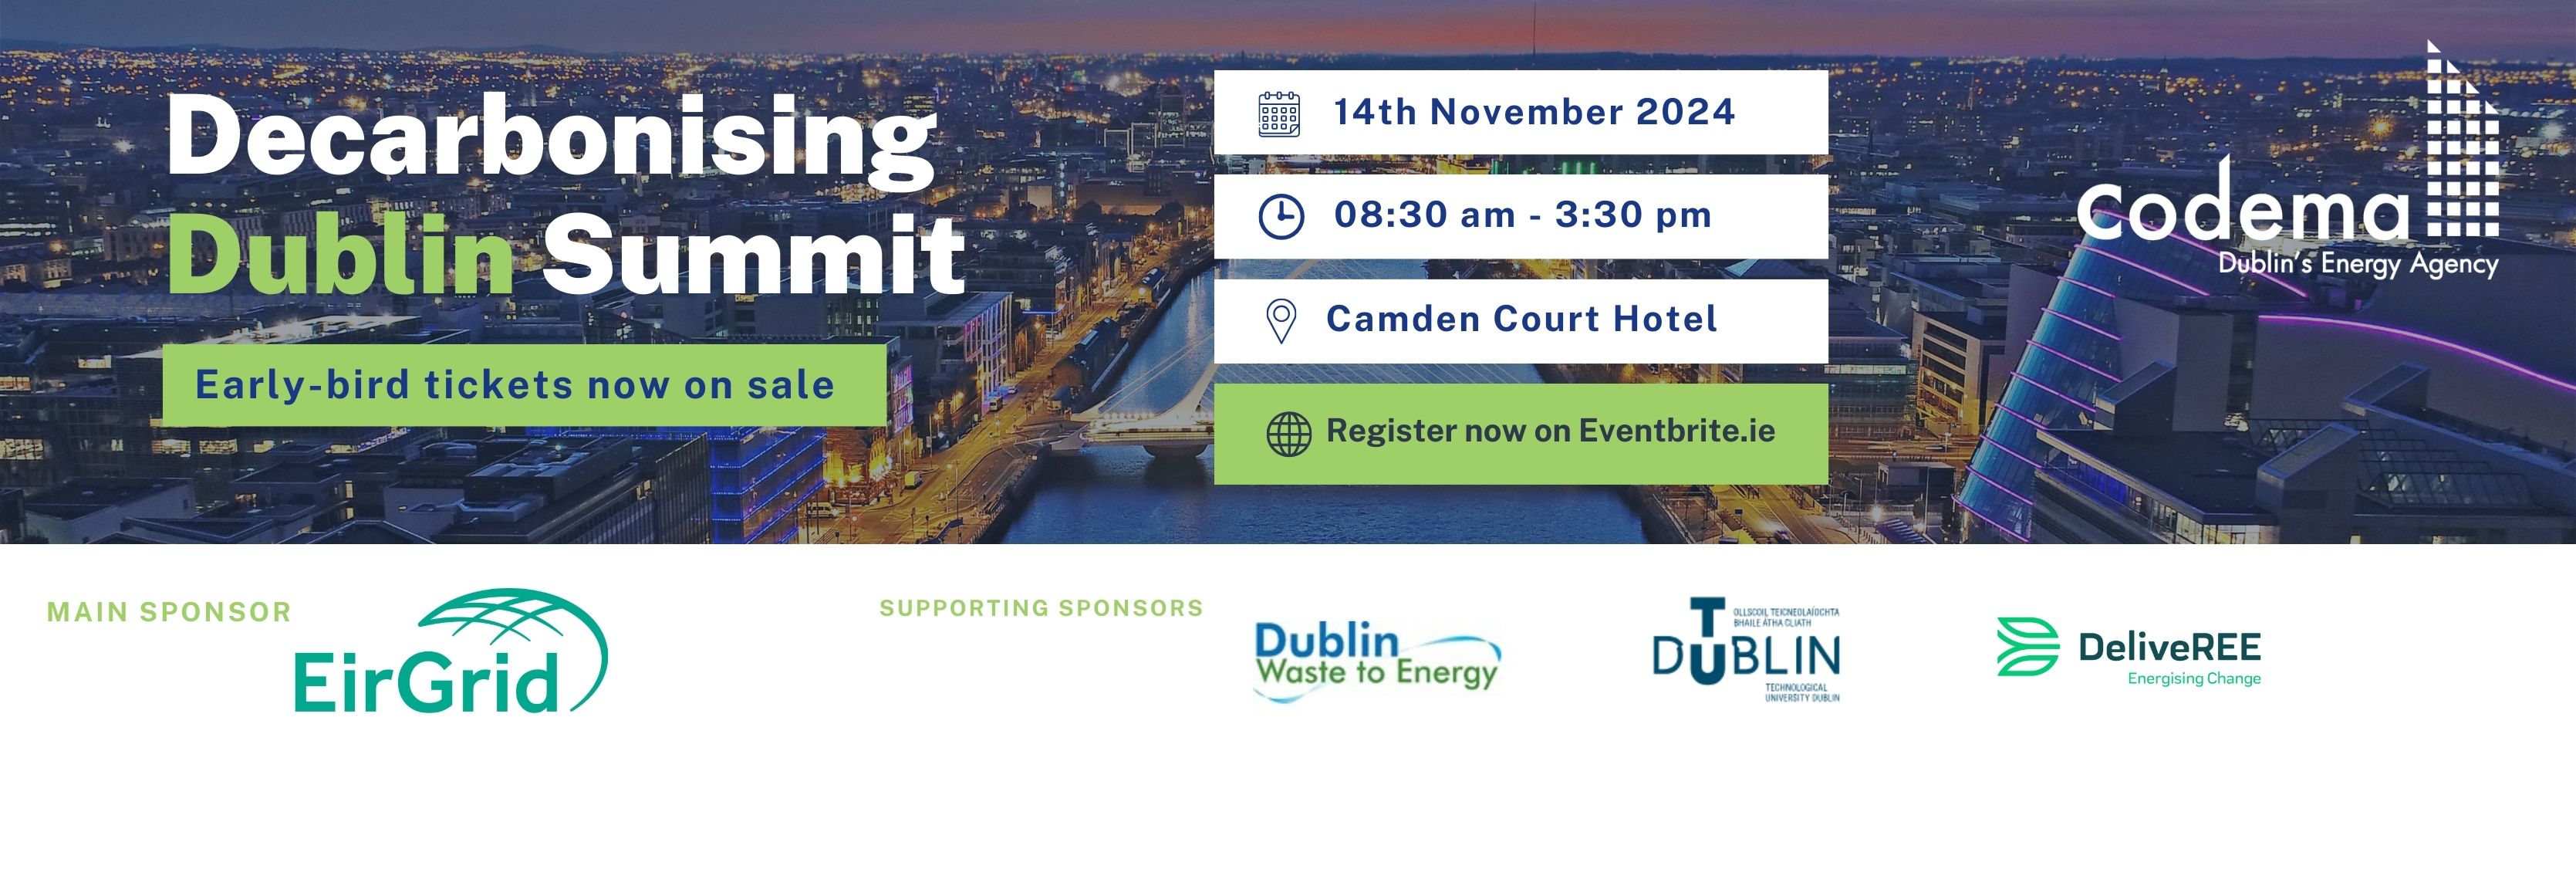 Early-bird tickets now on sale for the Decarbonising Dublin Summit